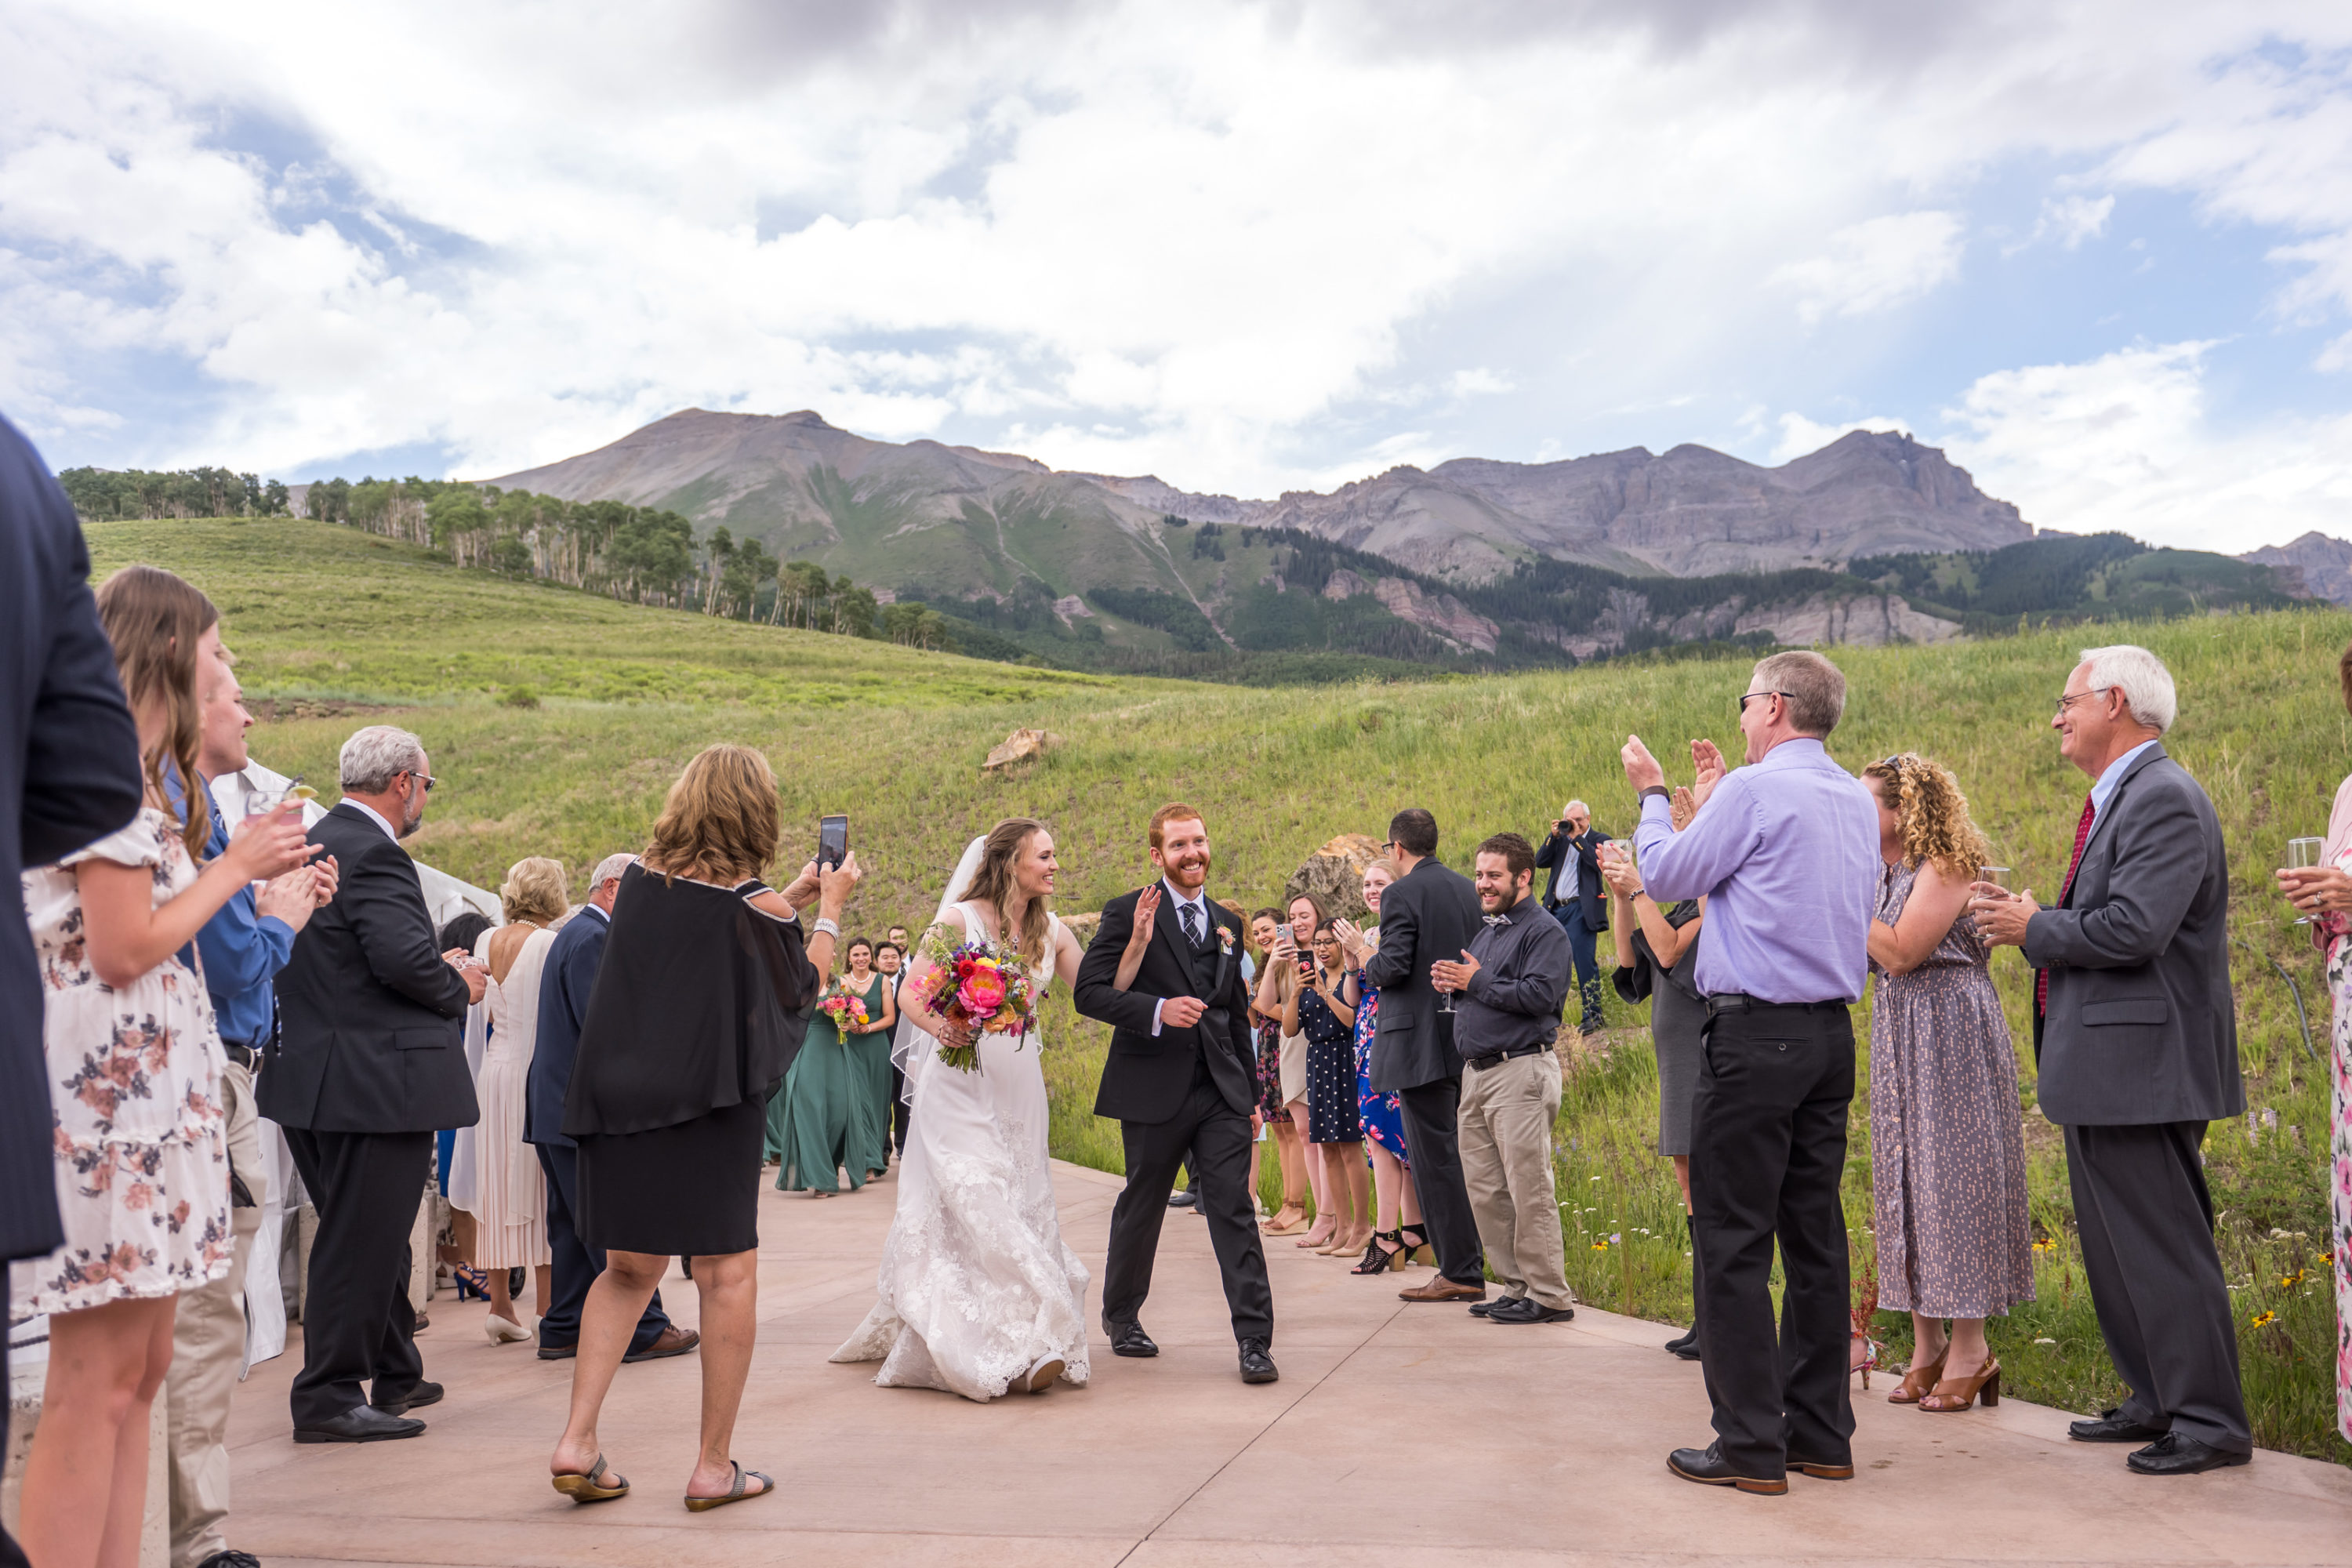 The bride and groom arrive during their wedding in Telluride, Colorado.